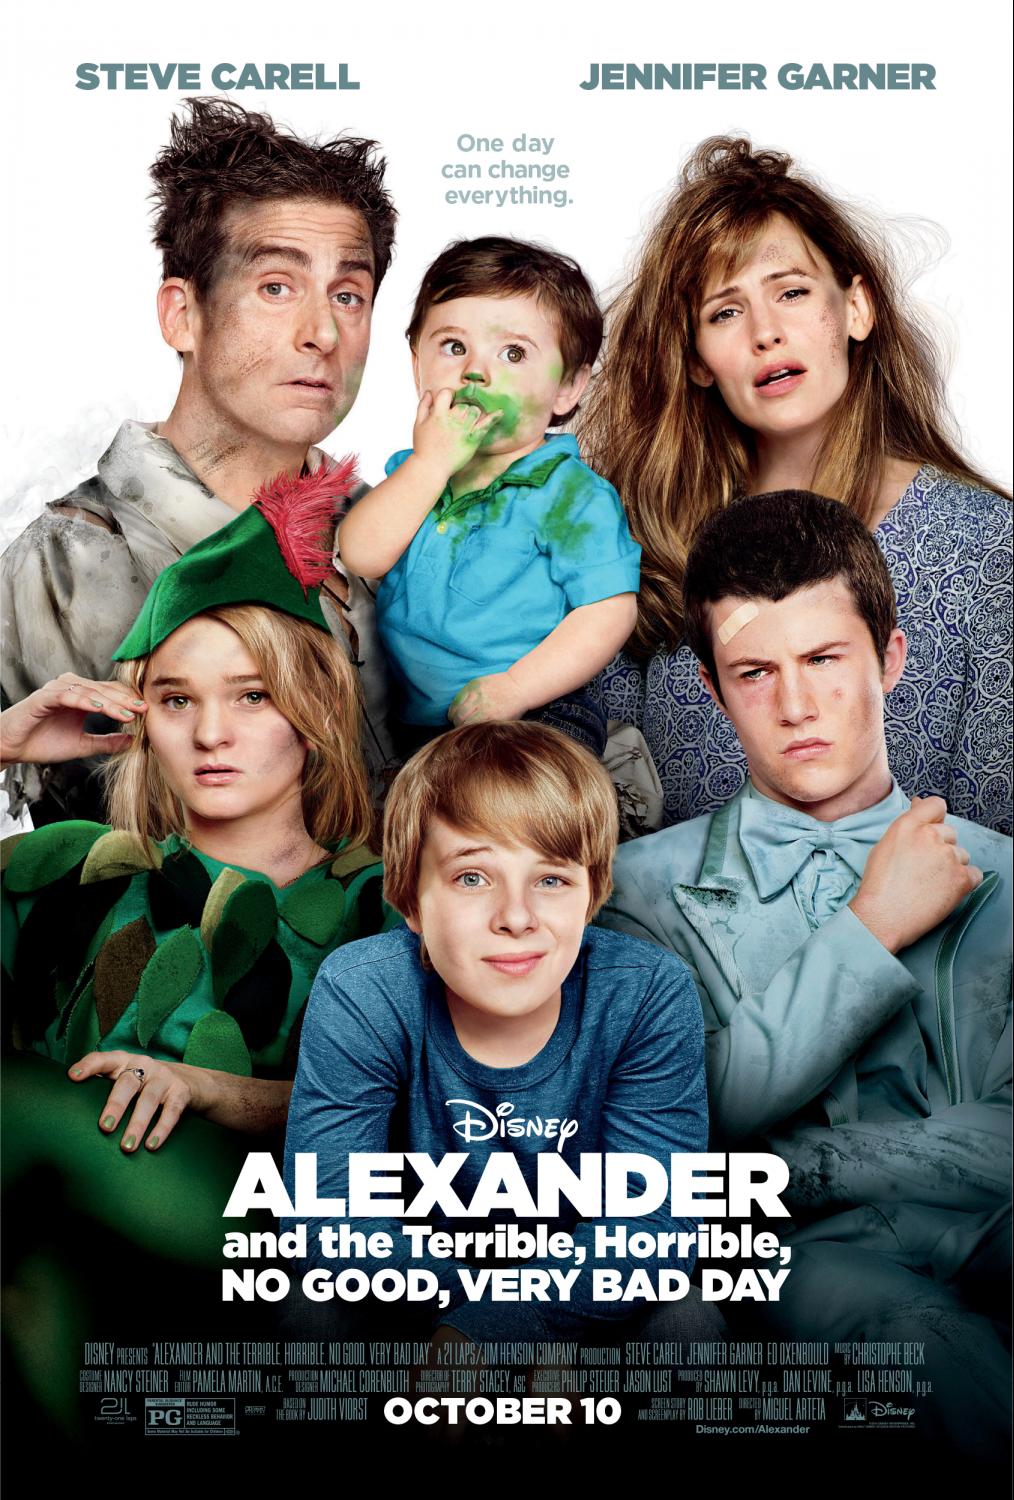 Disney's ALEXANDER AND THE TERRIBLE, HORRIBLE, NO GOOD, VERY BAD DAY sweepstakes